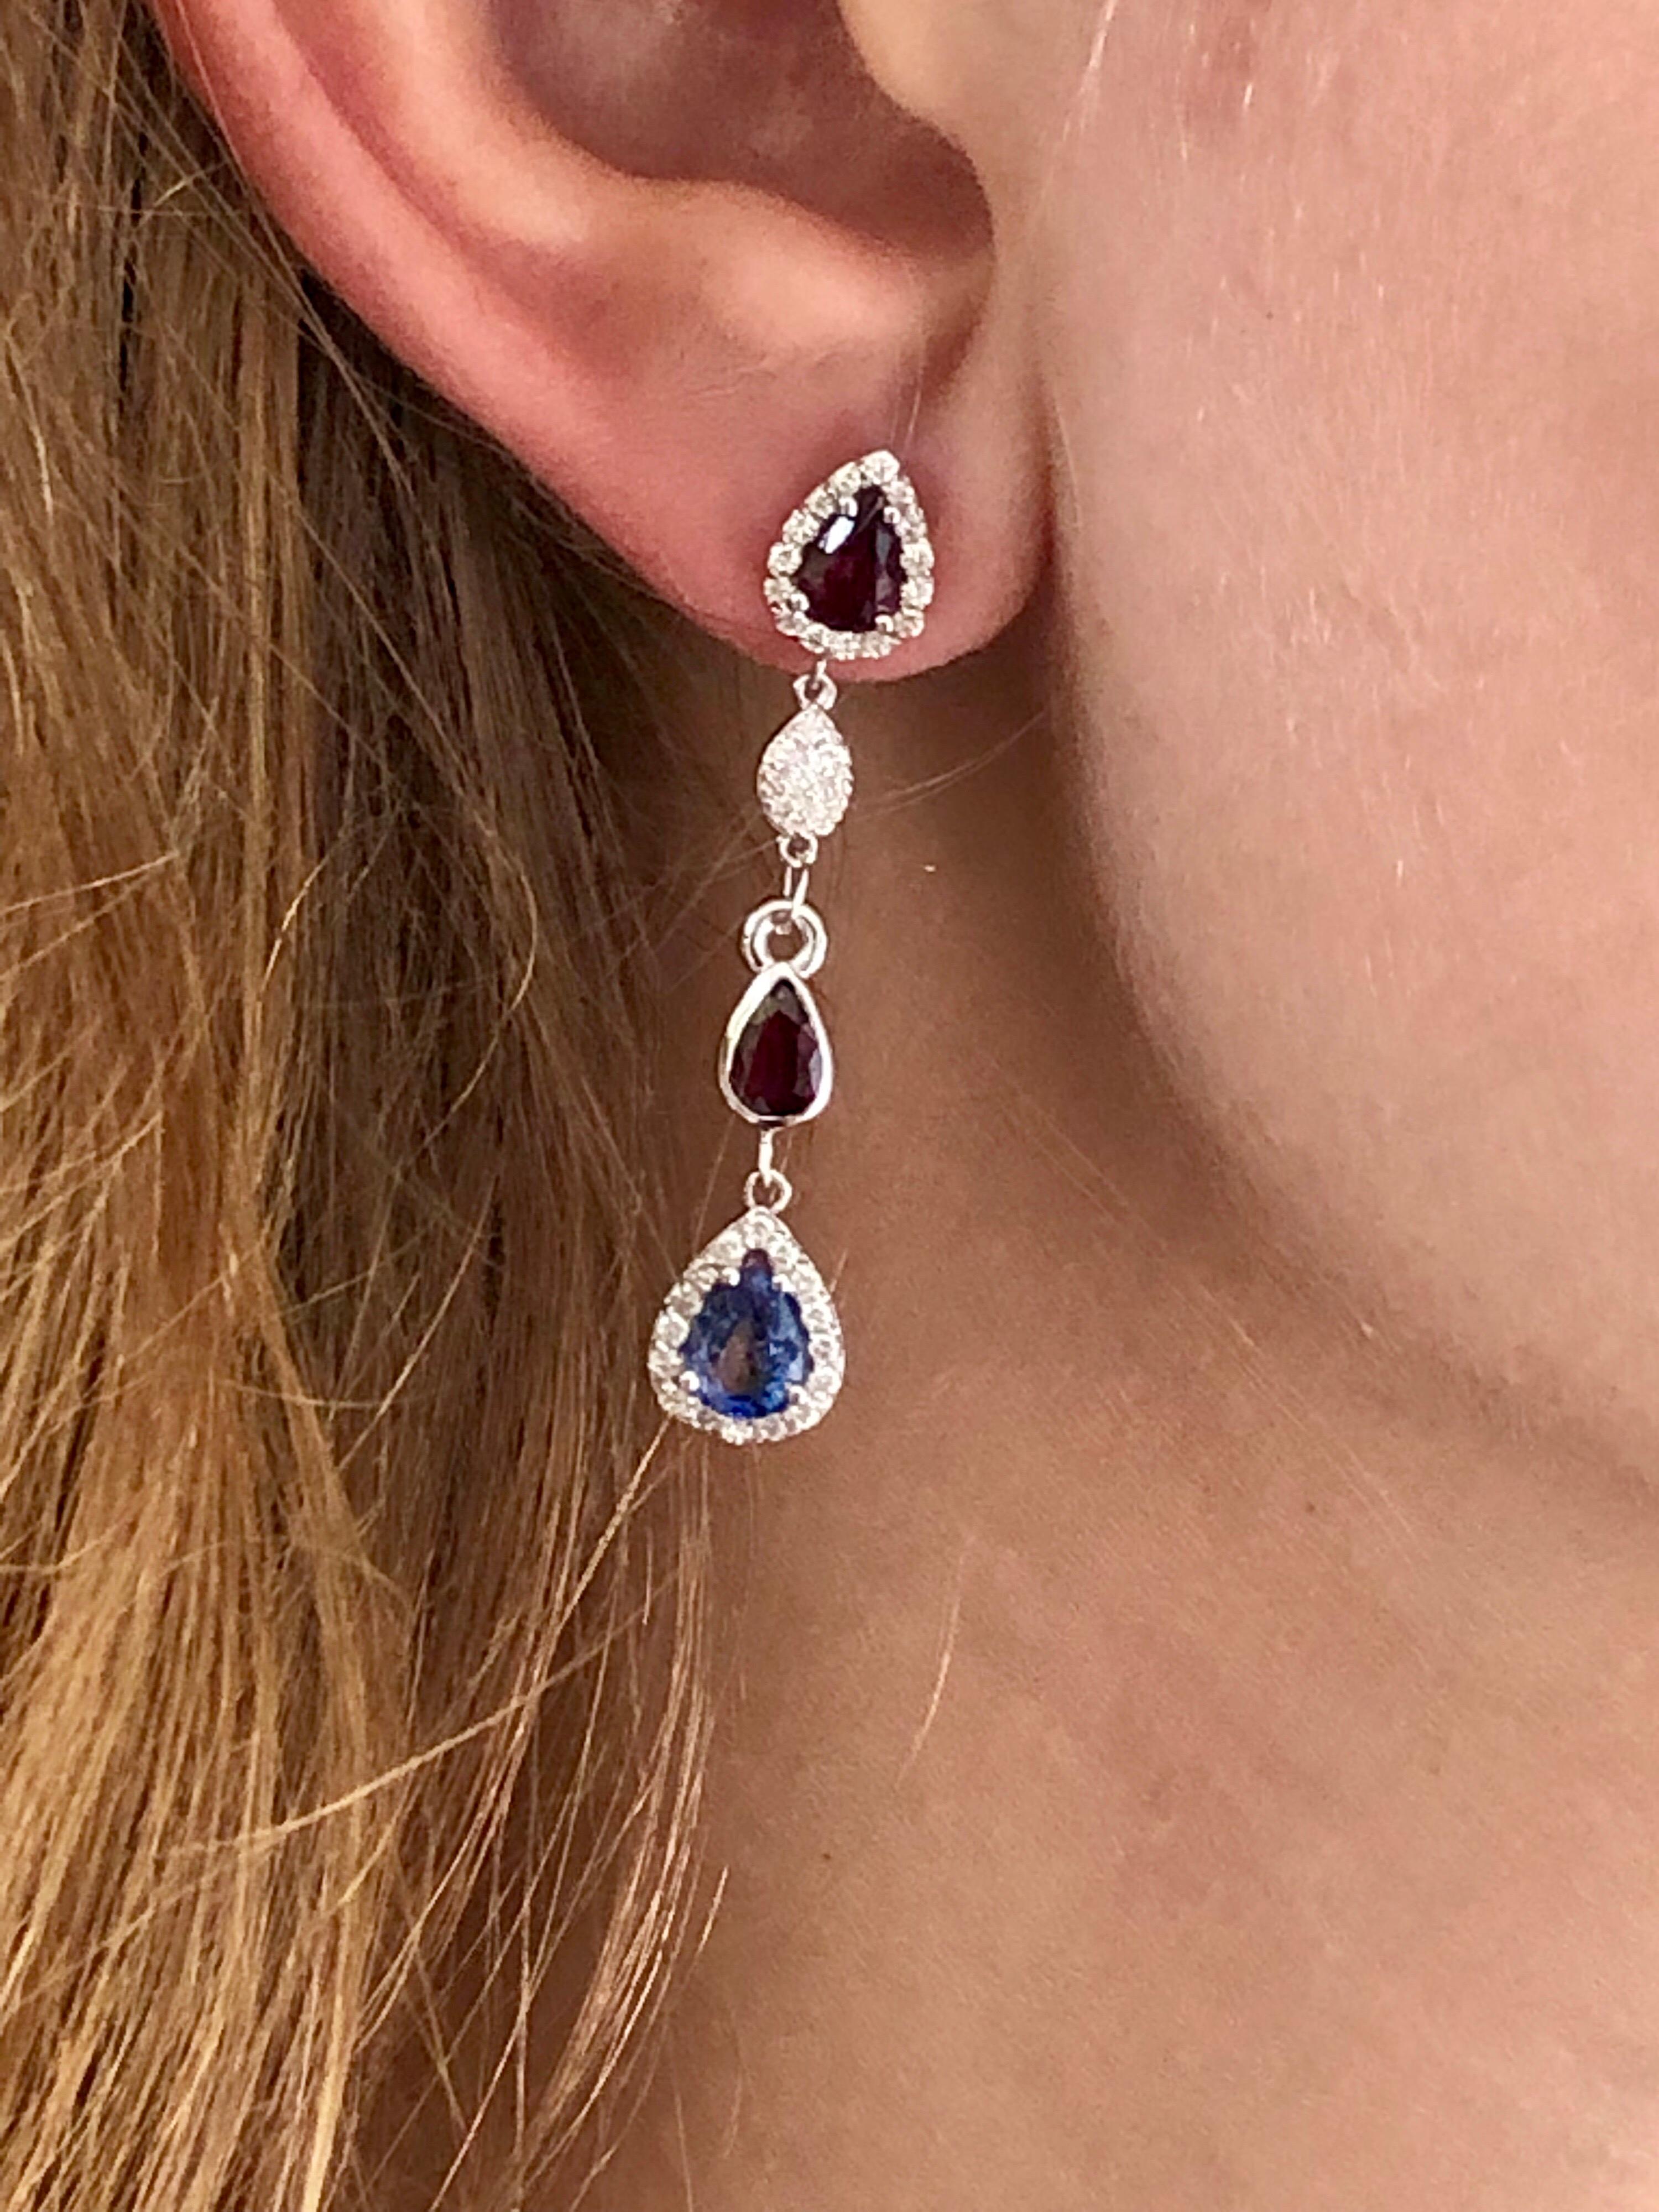 Diamond Earrings with Ruby and Sapphire Drops Weighing 4.96 Carat  1